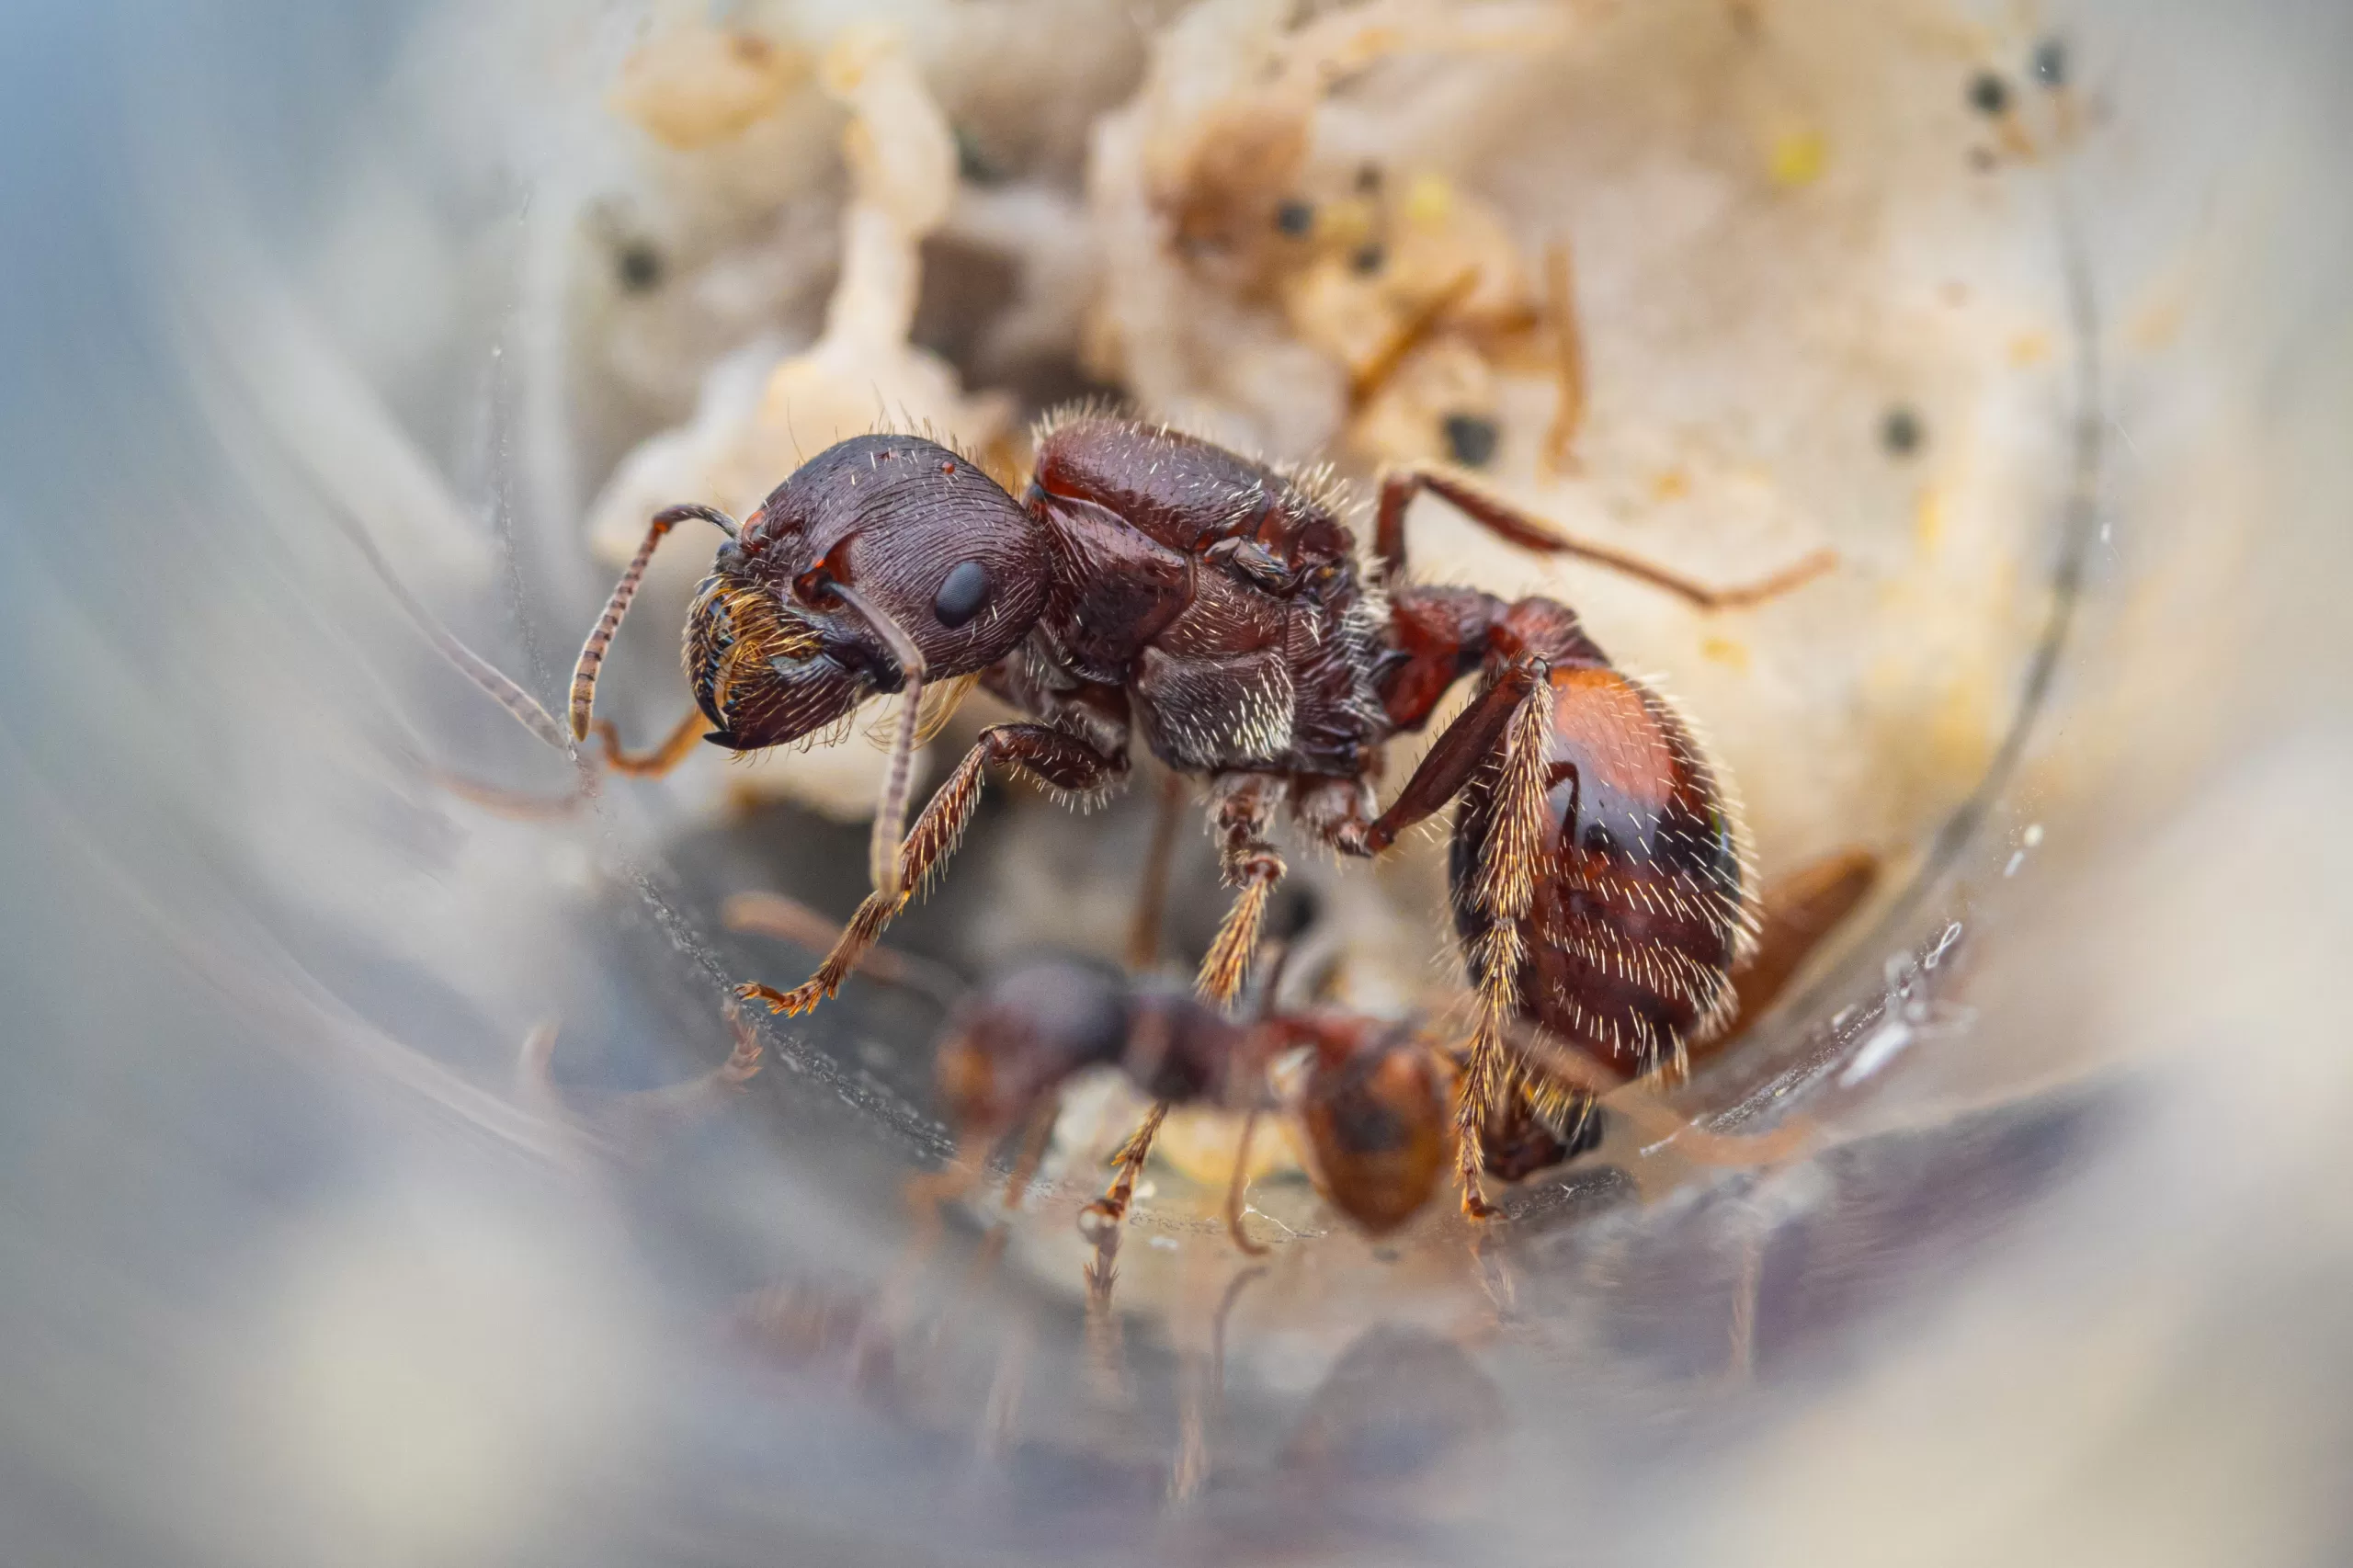 A young colony of Pogonomyrmex rugosus.